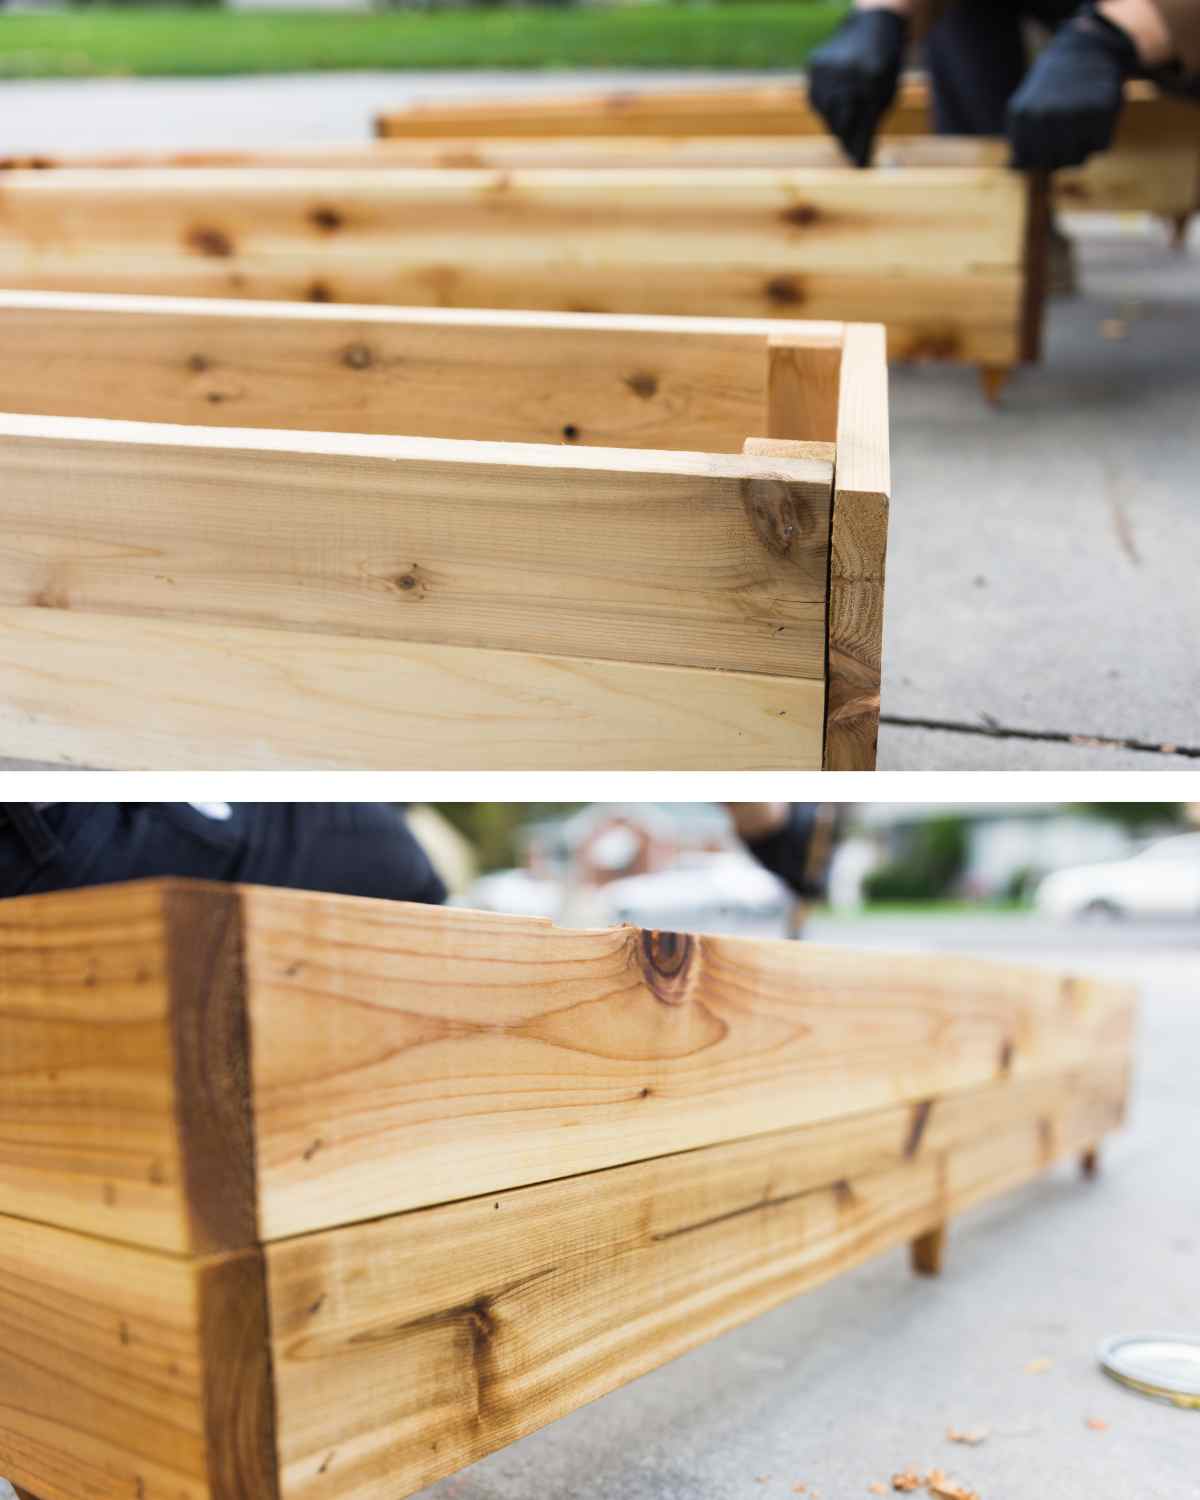 Image showing a cider wood planter box up close.